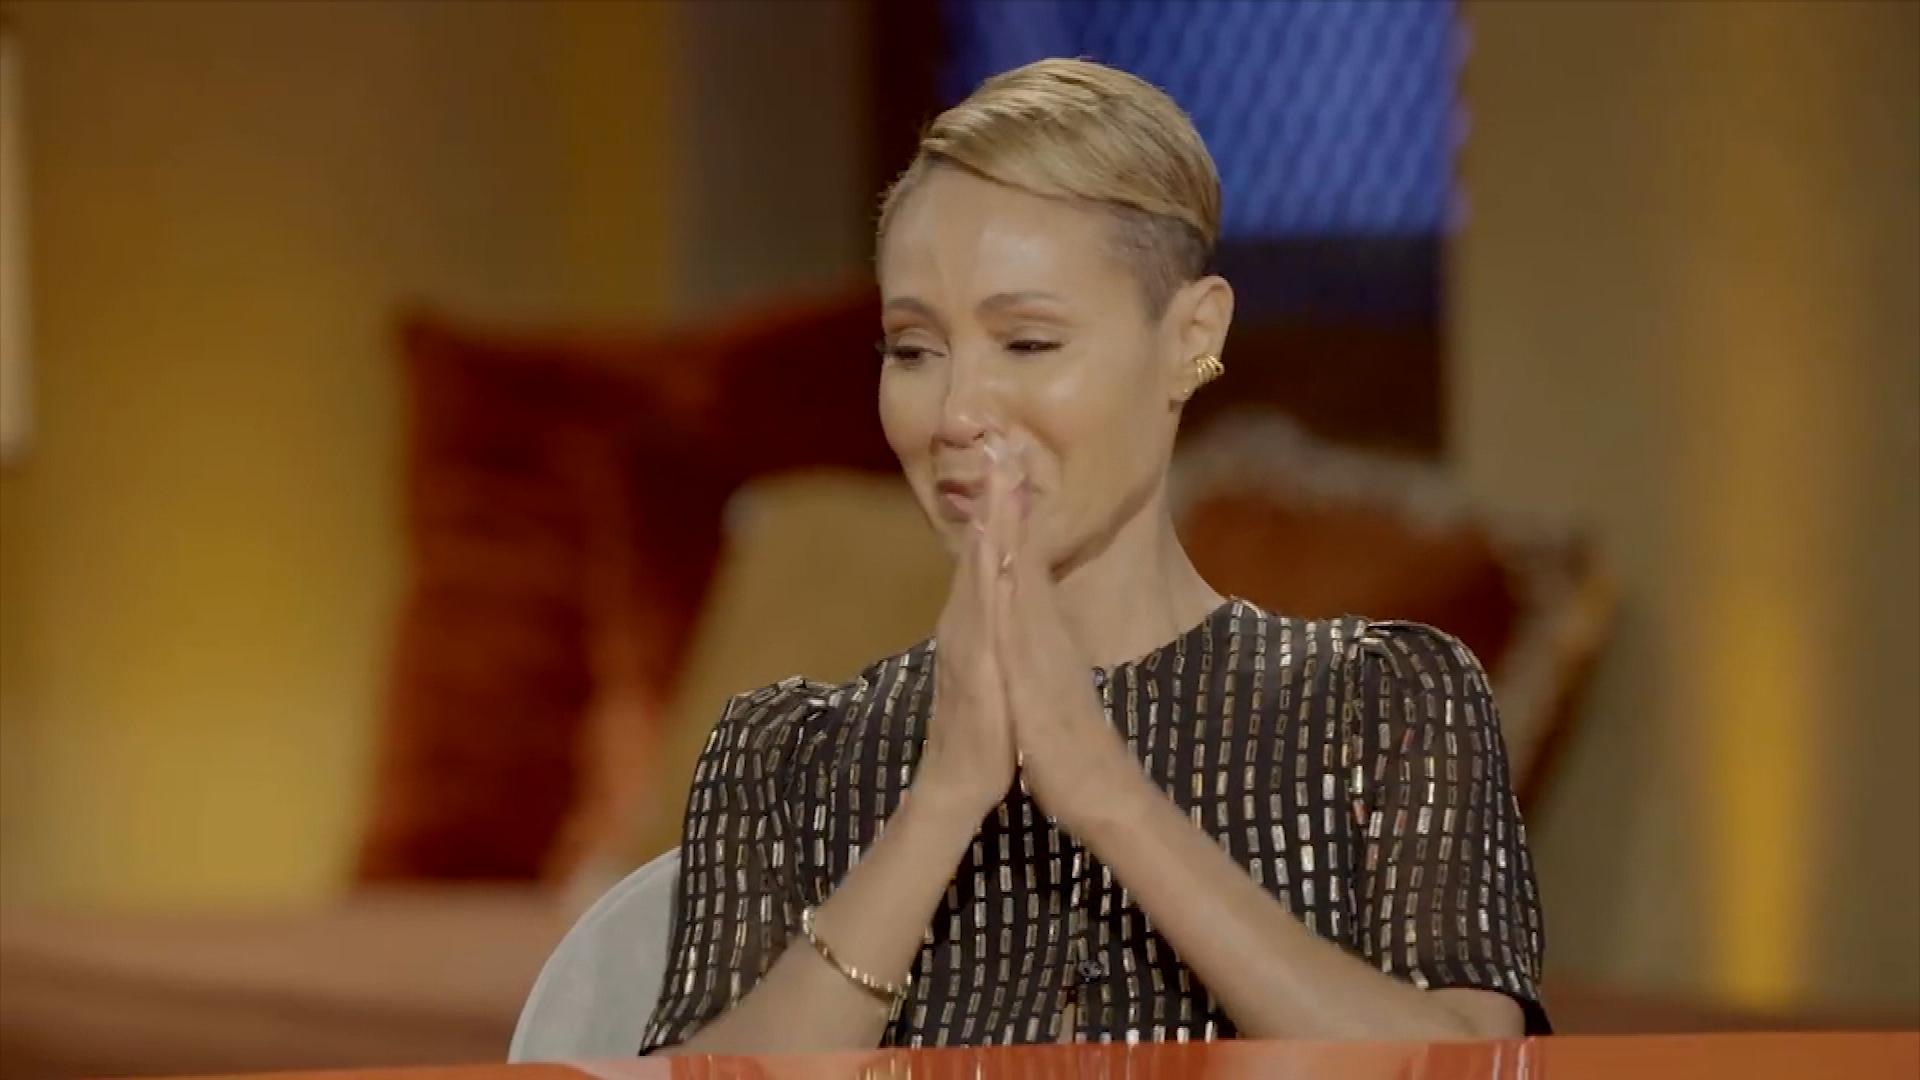 Jada Pinkett Smith Dedicating Two Part Red Table Talk Special On